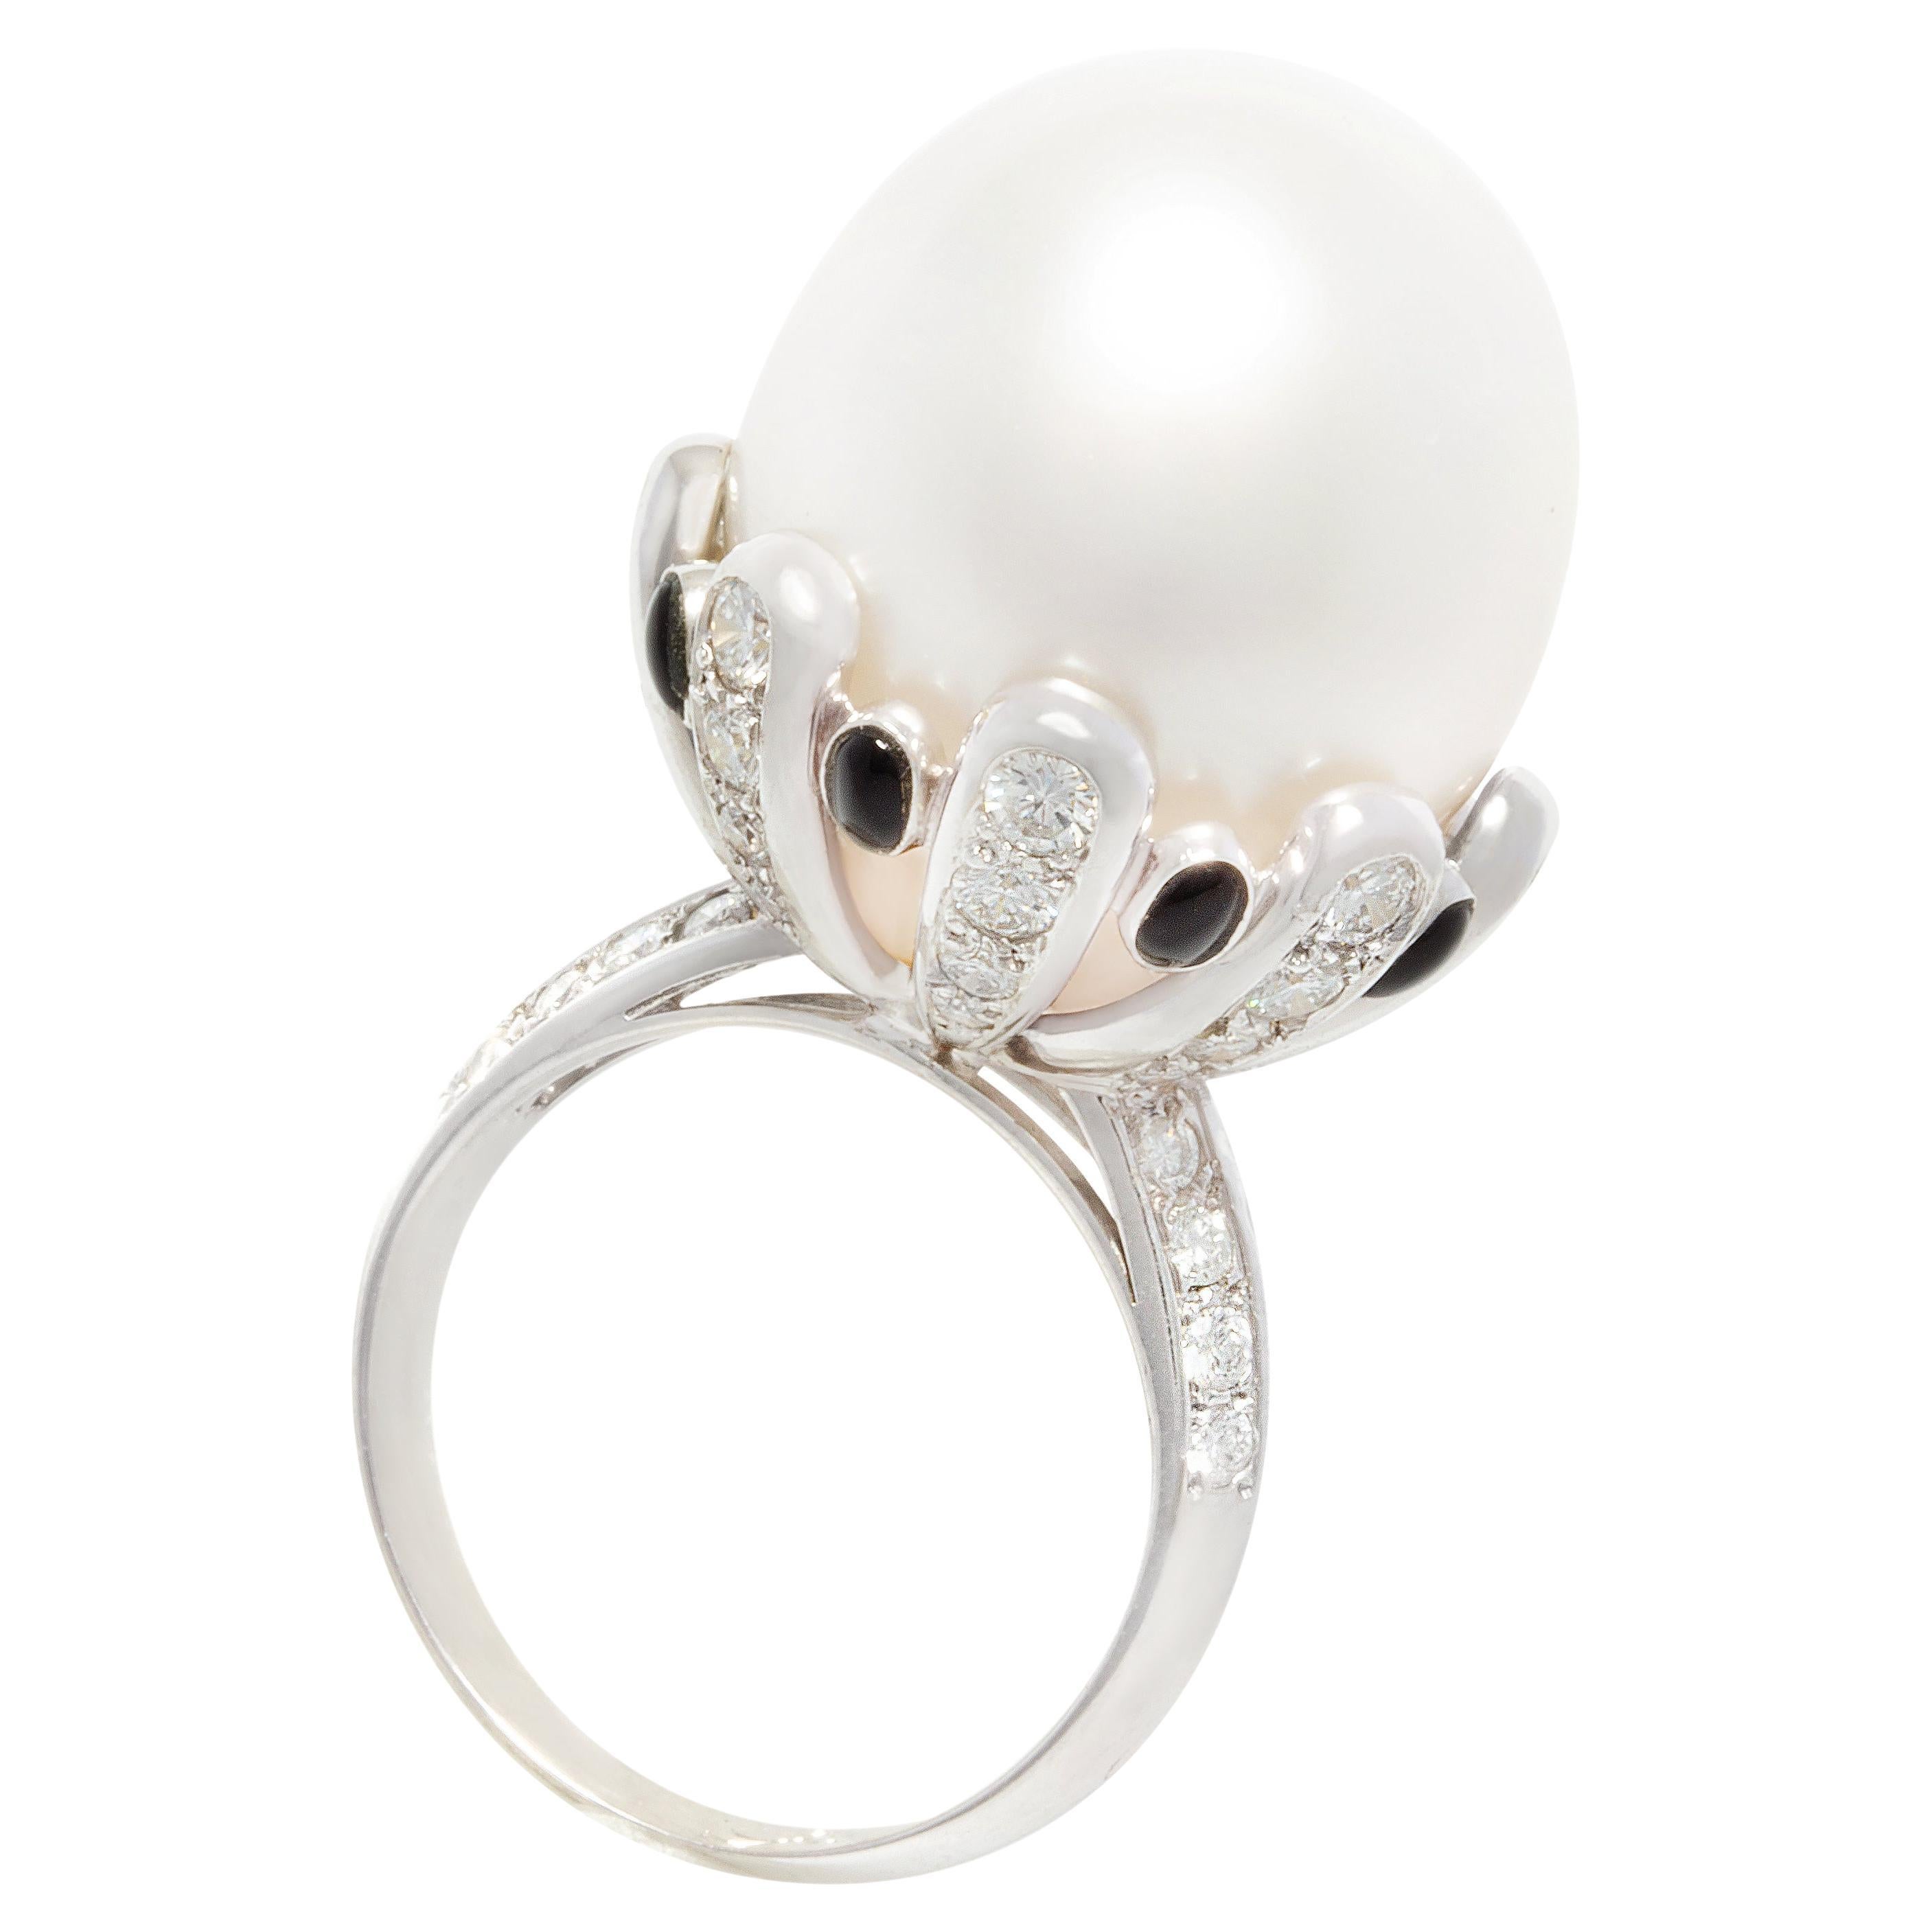 Ella Gafter Art Déco style 17mm Pearl Onyx Ring